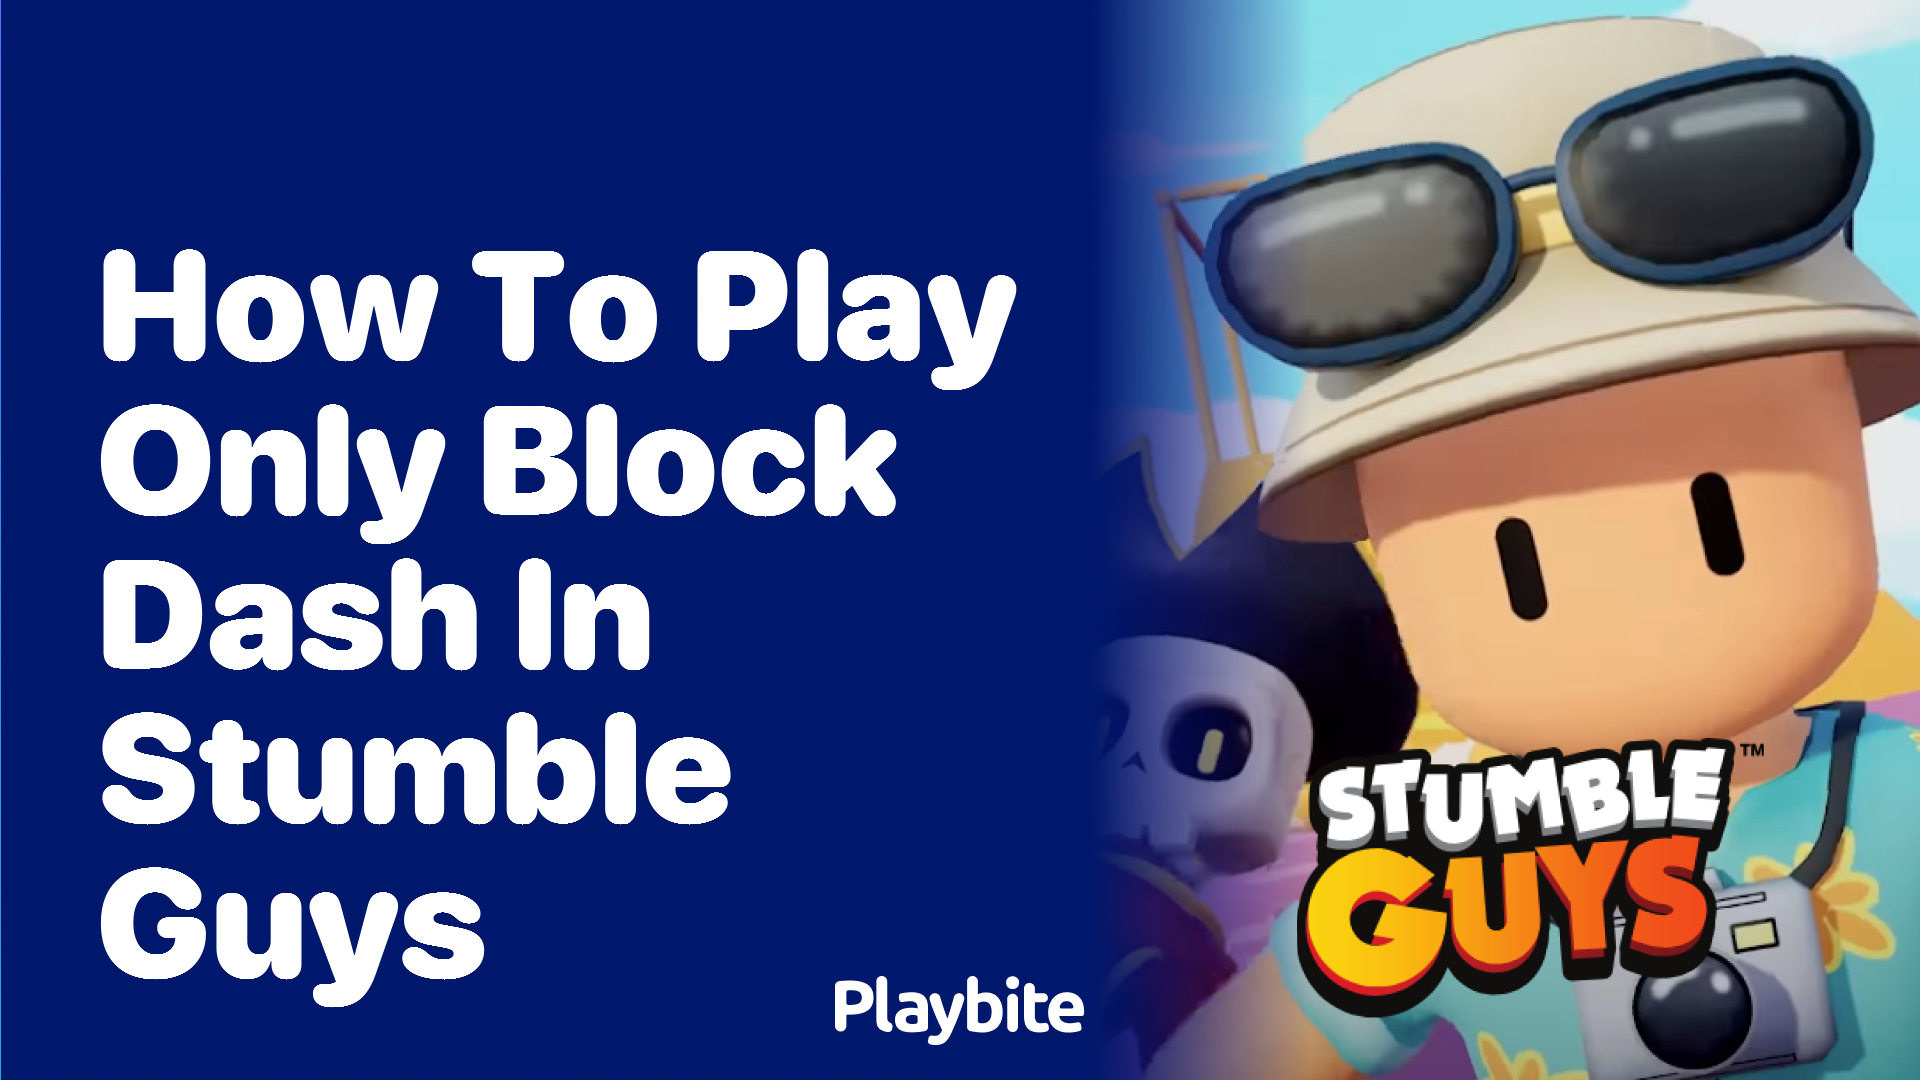 How to Play Only Block Dash in Stumble Guys